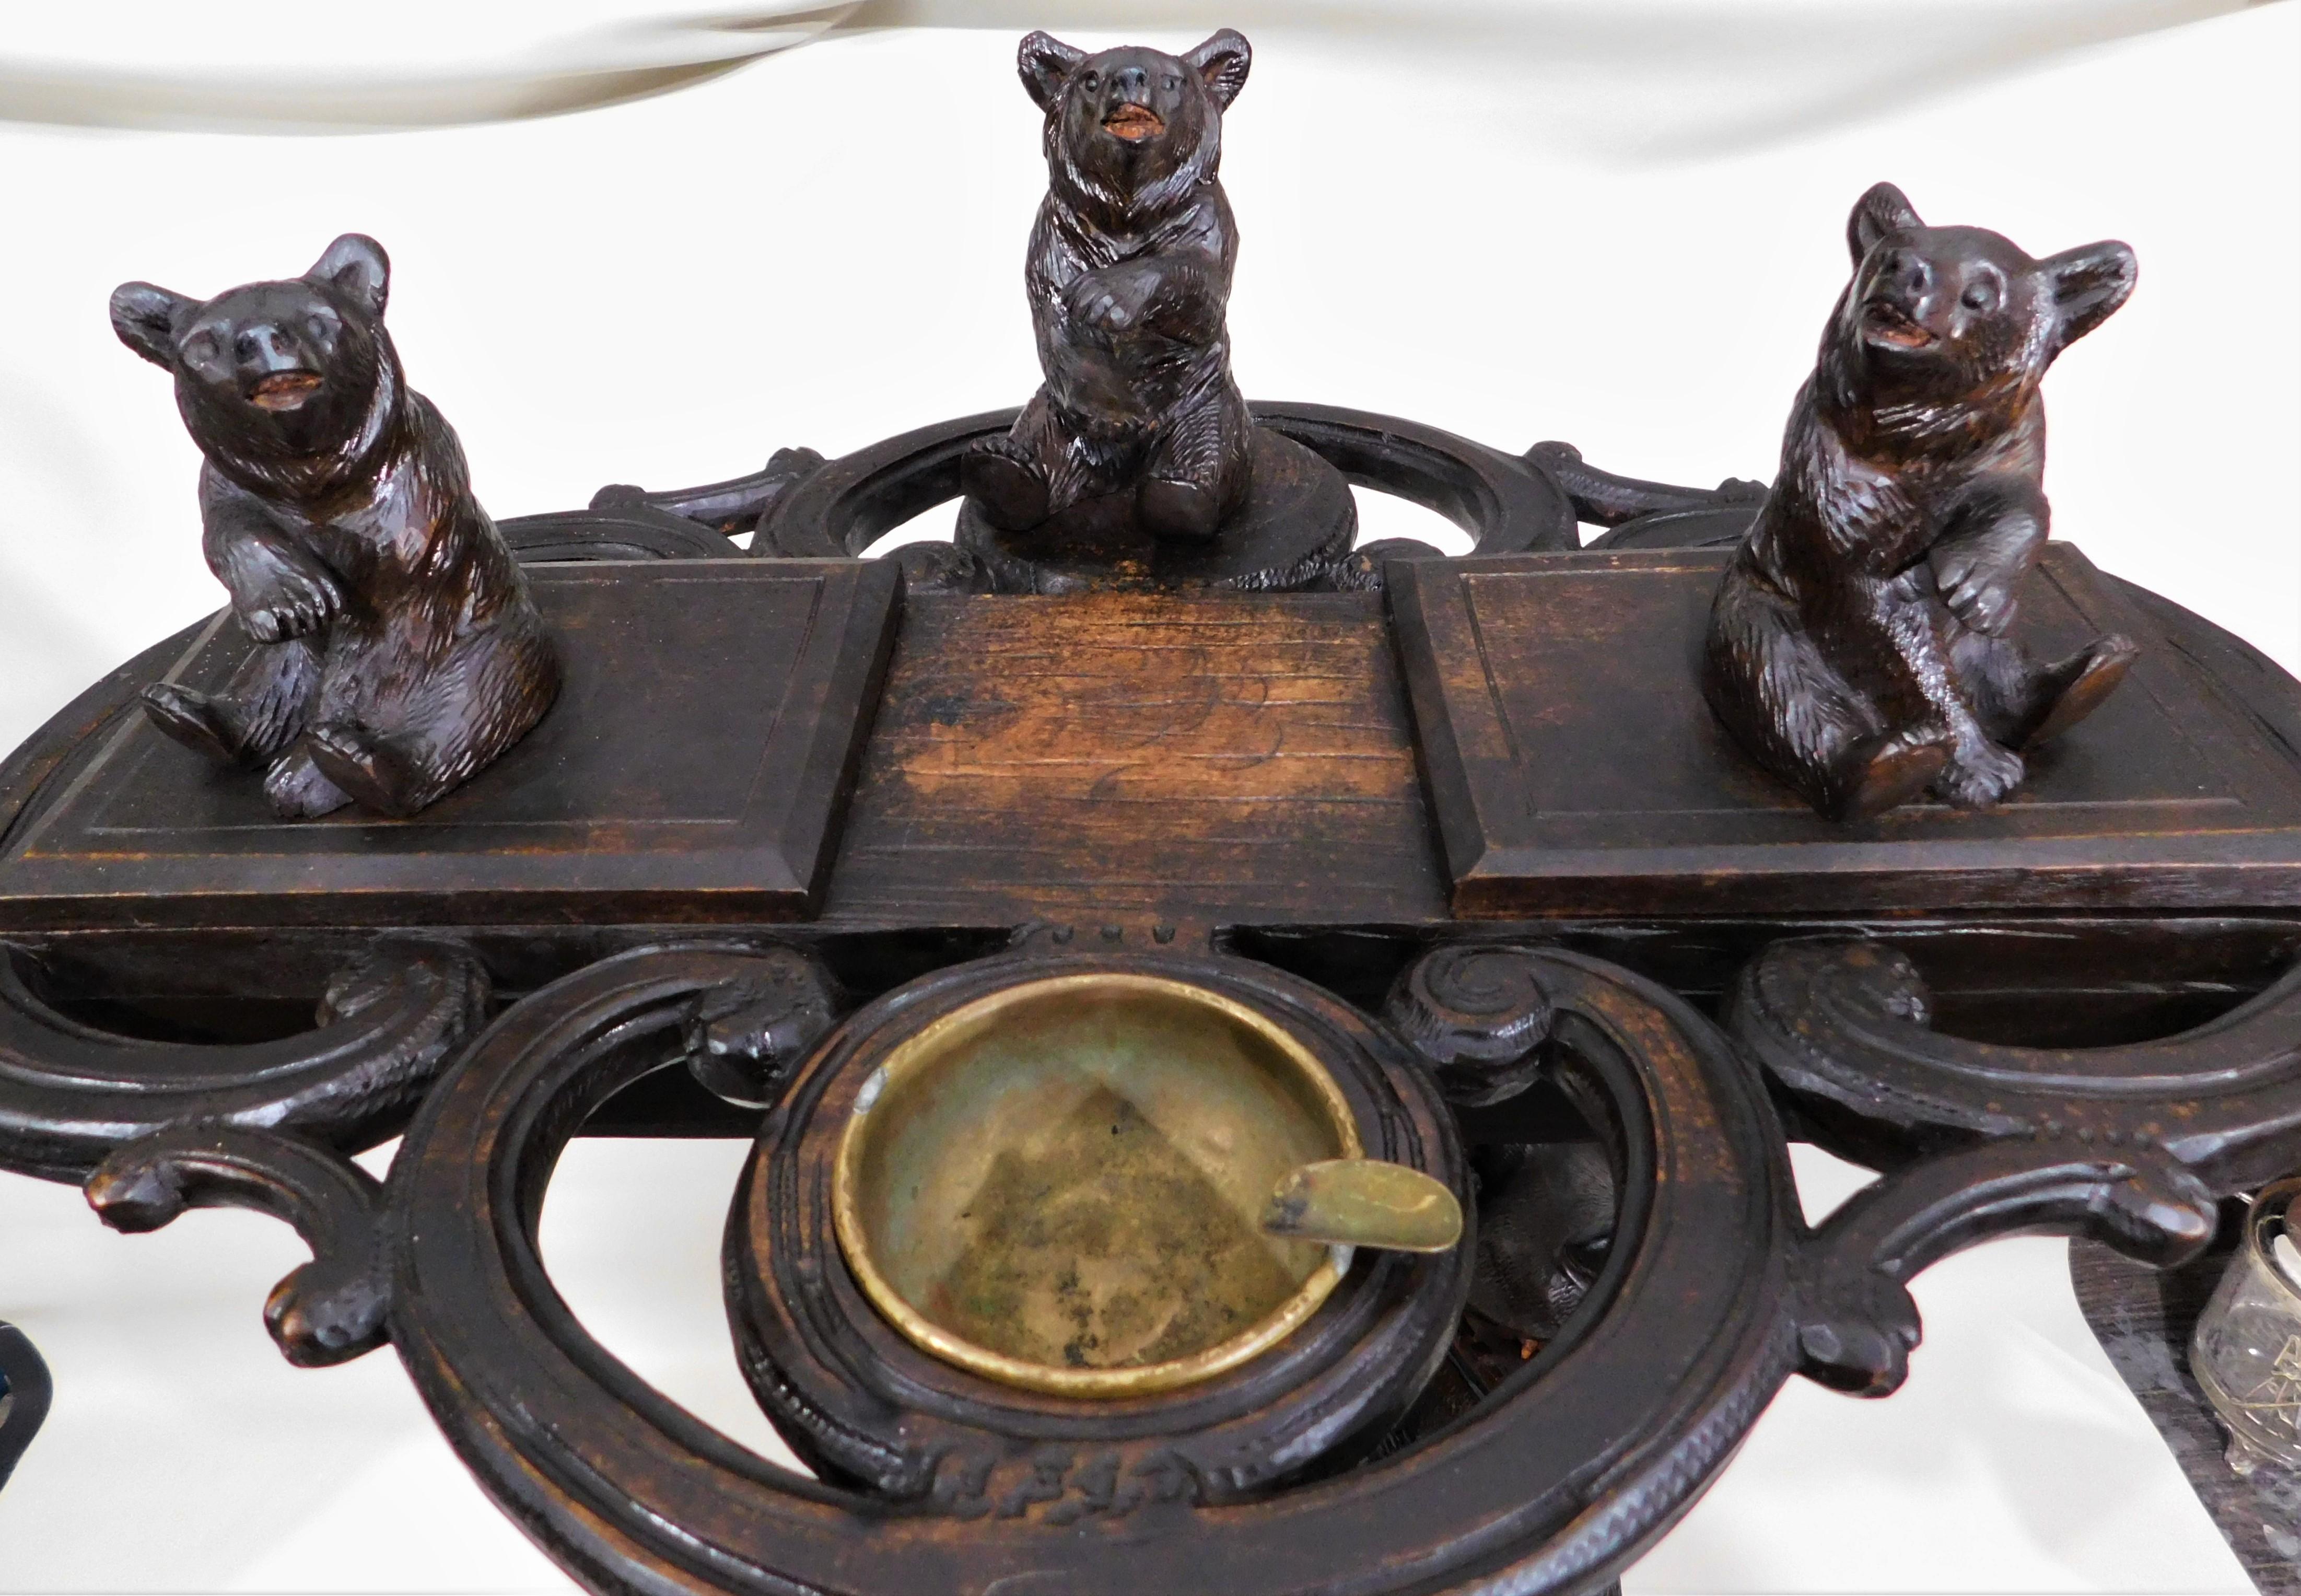 19th Century Black Forest Carved Bears Smokers Table Stand with Brass Ashtray, circa 1890s